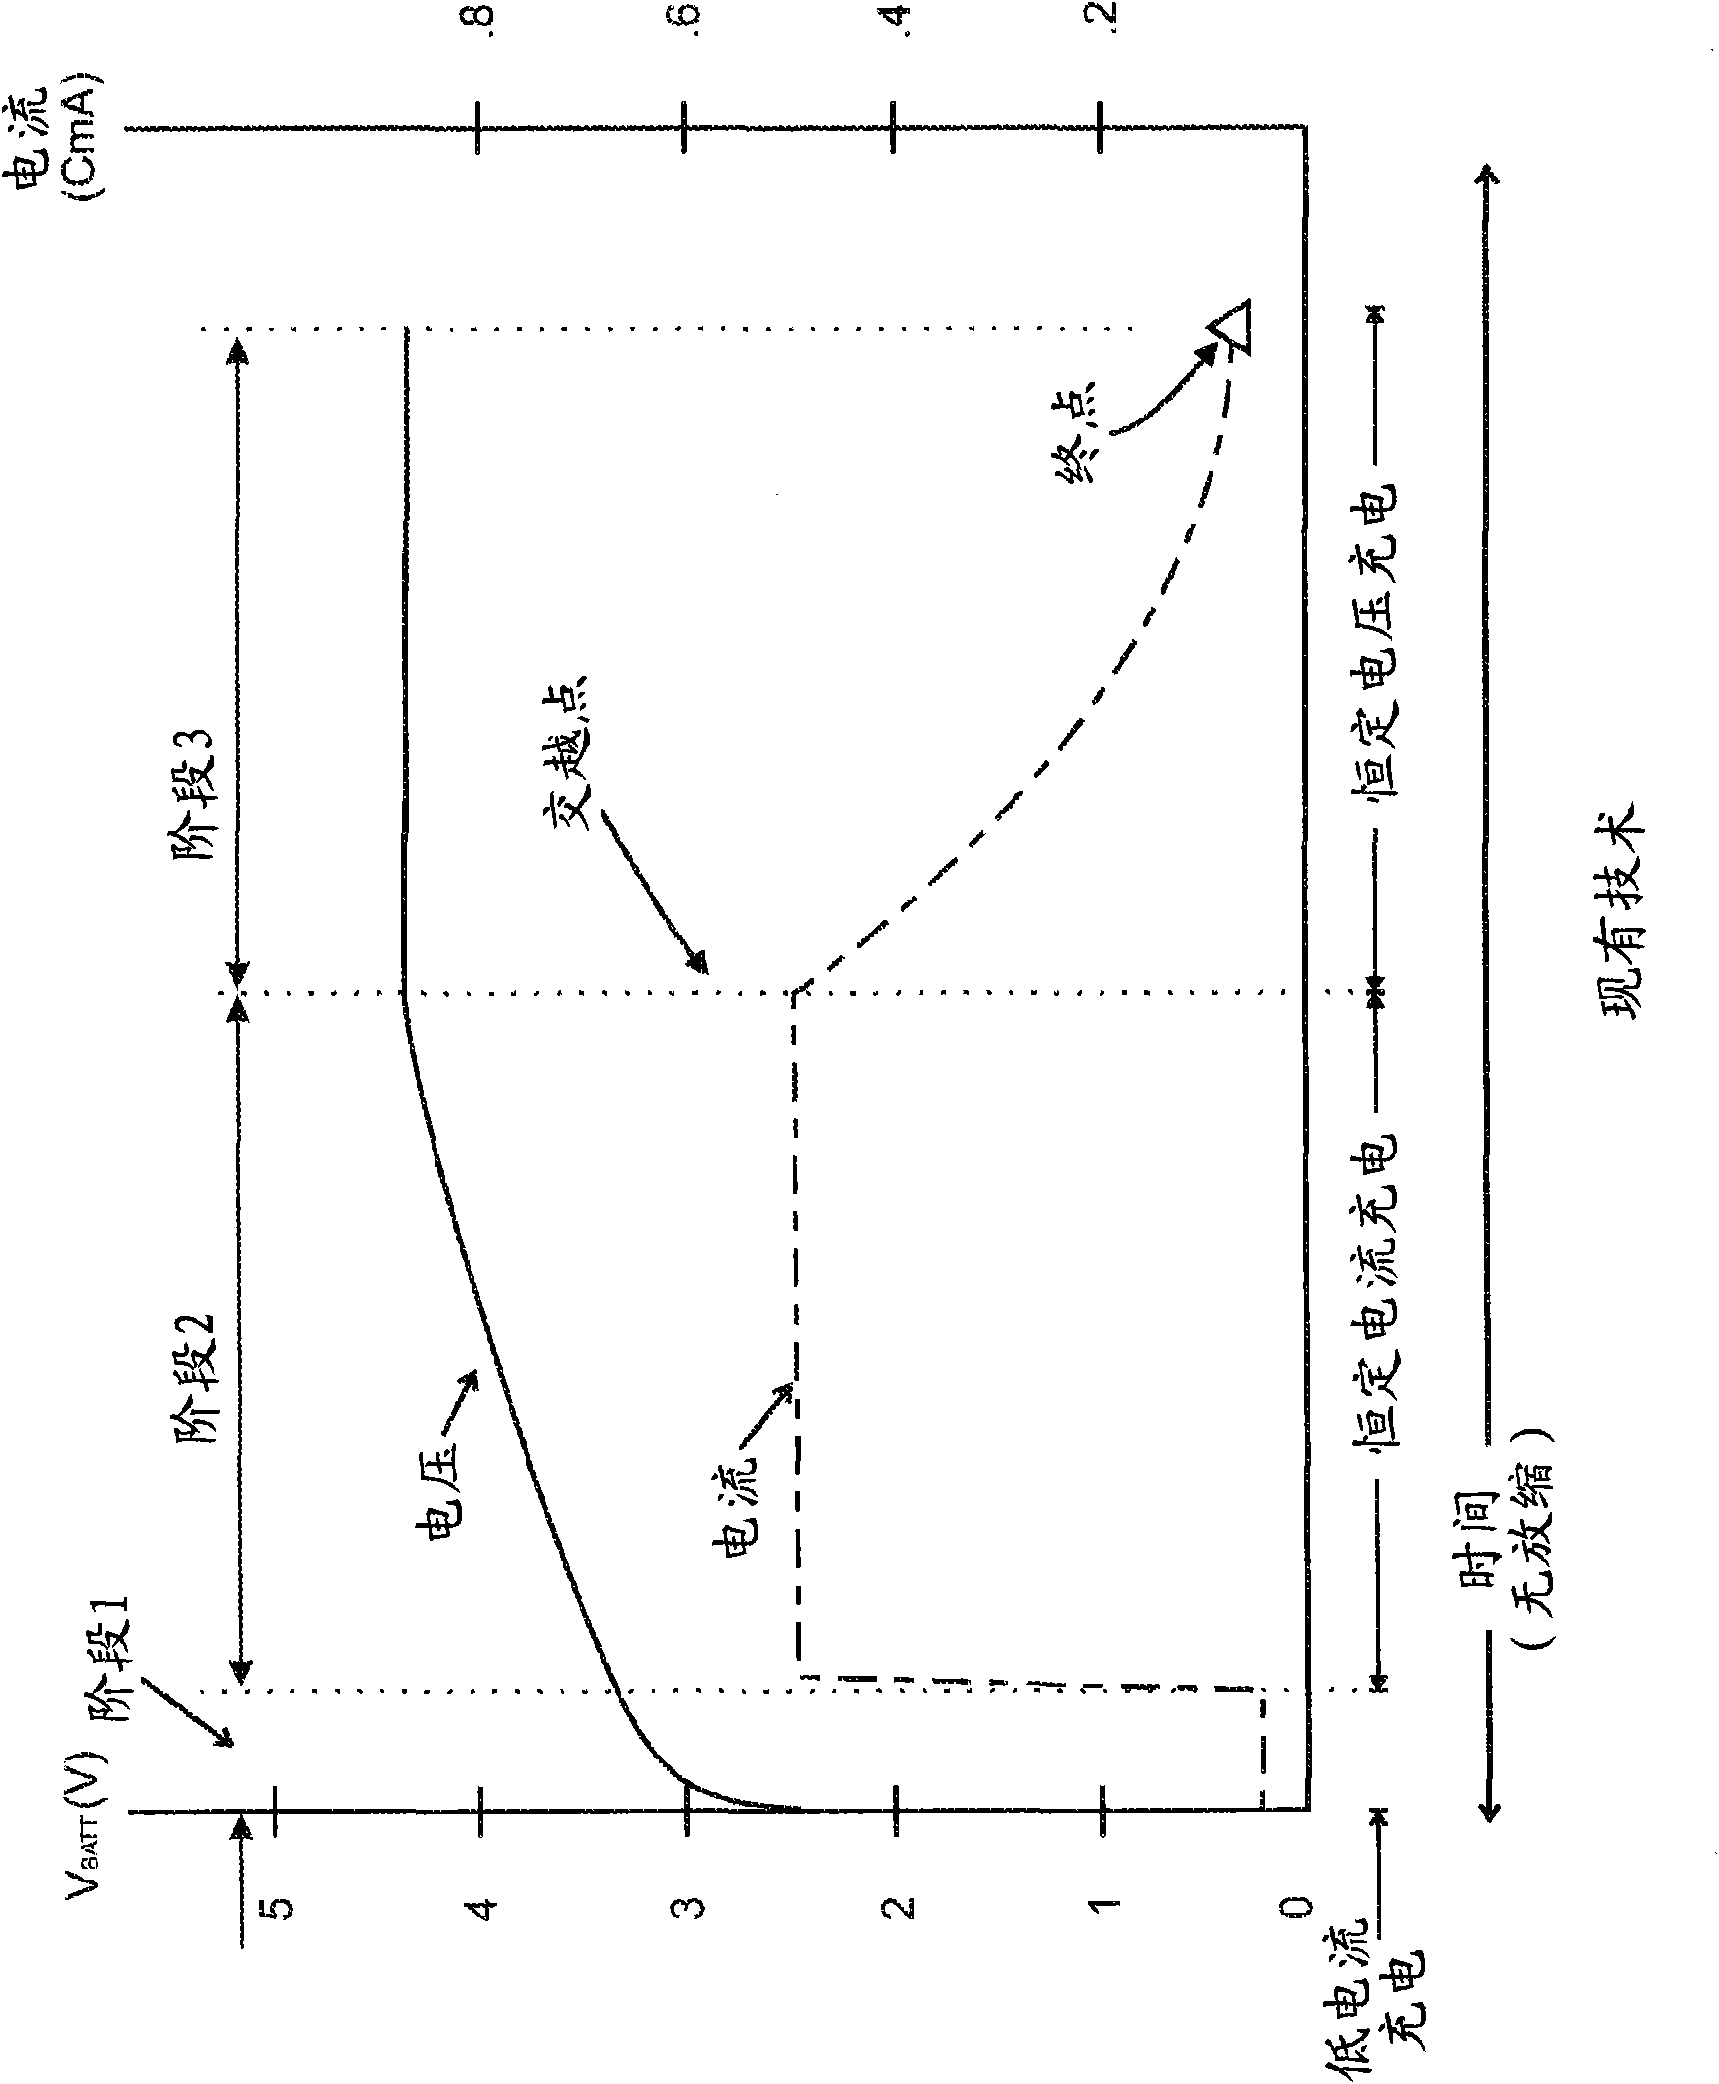 Method for charging a battery using a constant current adapted to provide a constant rate of change of open circuit battery voltage